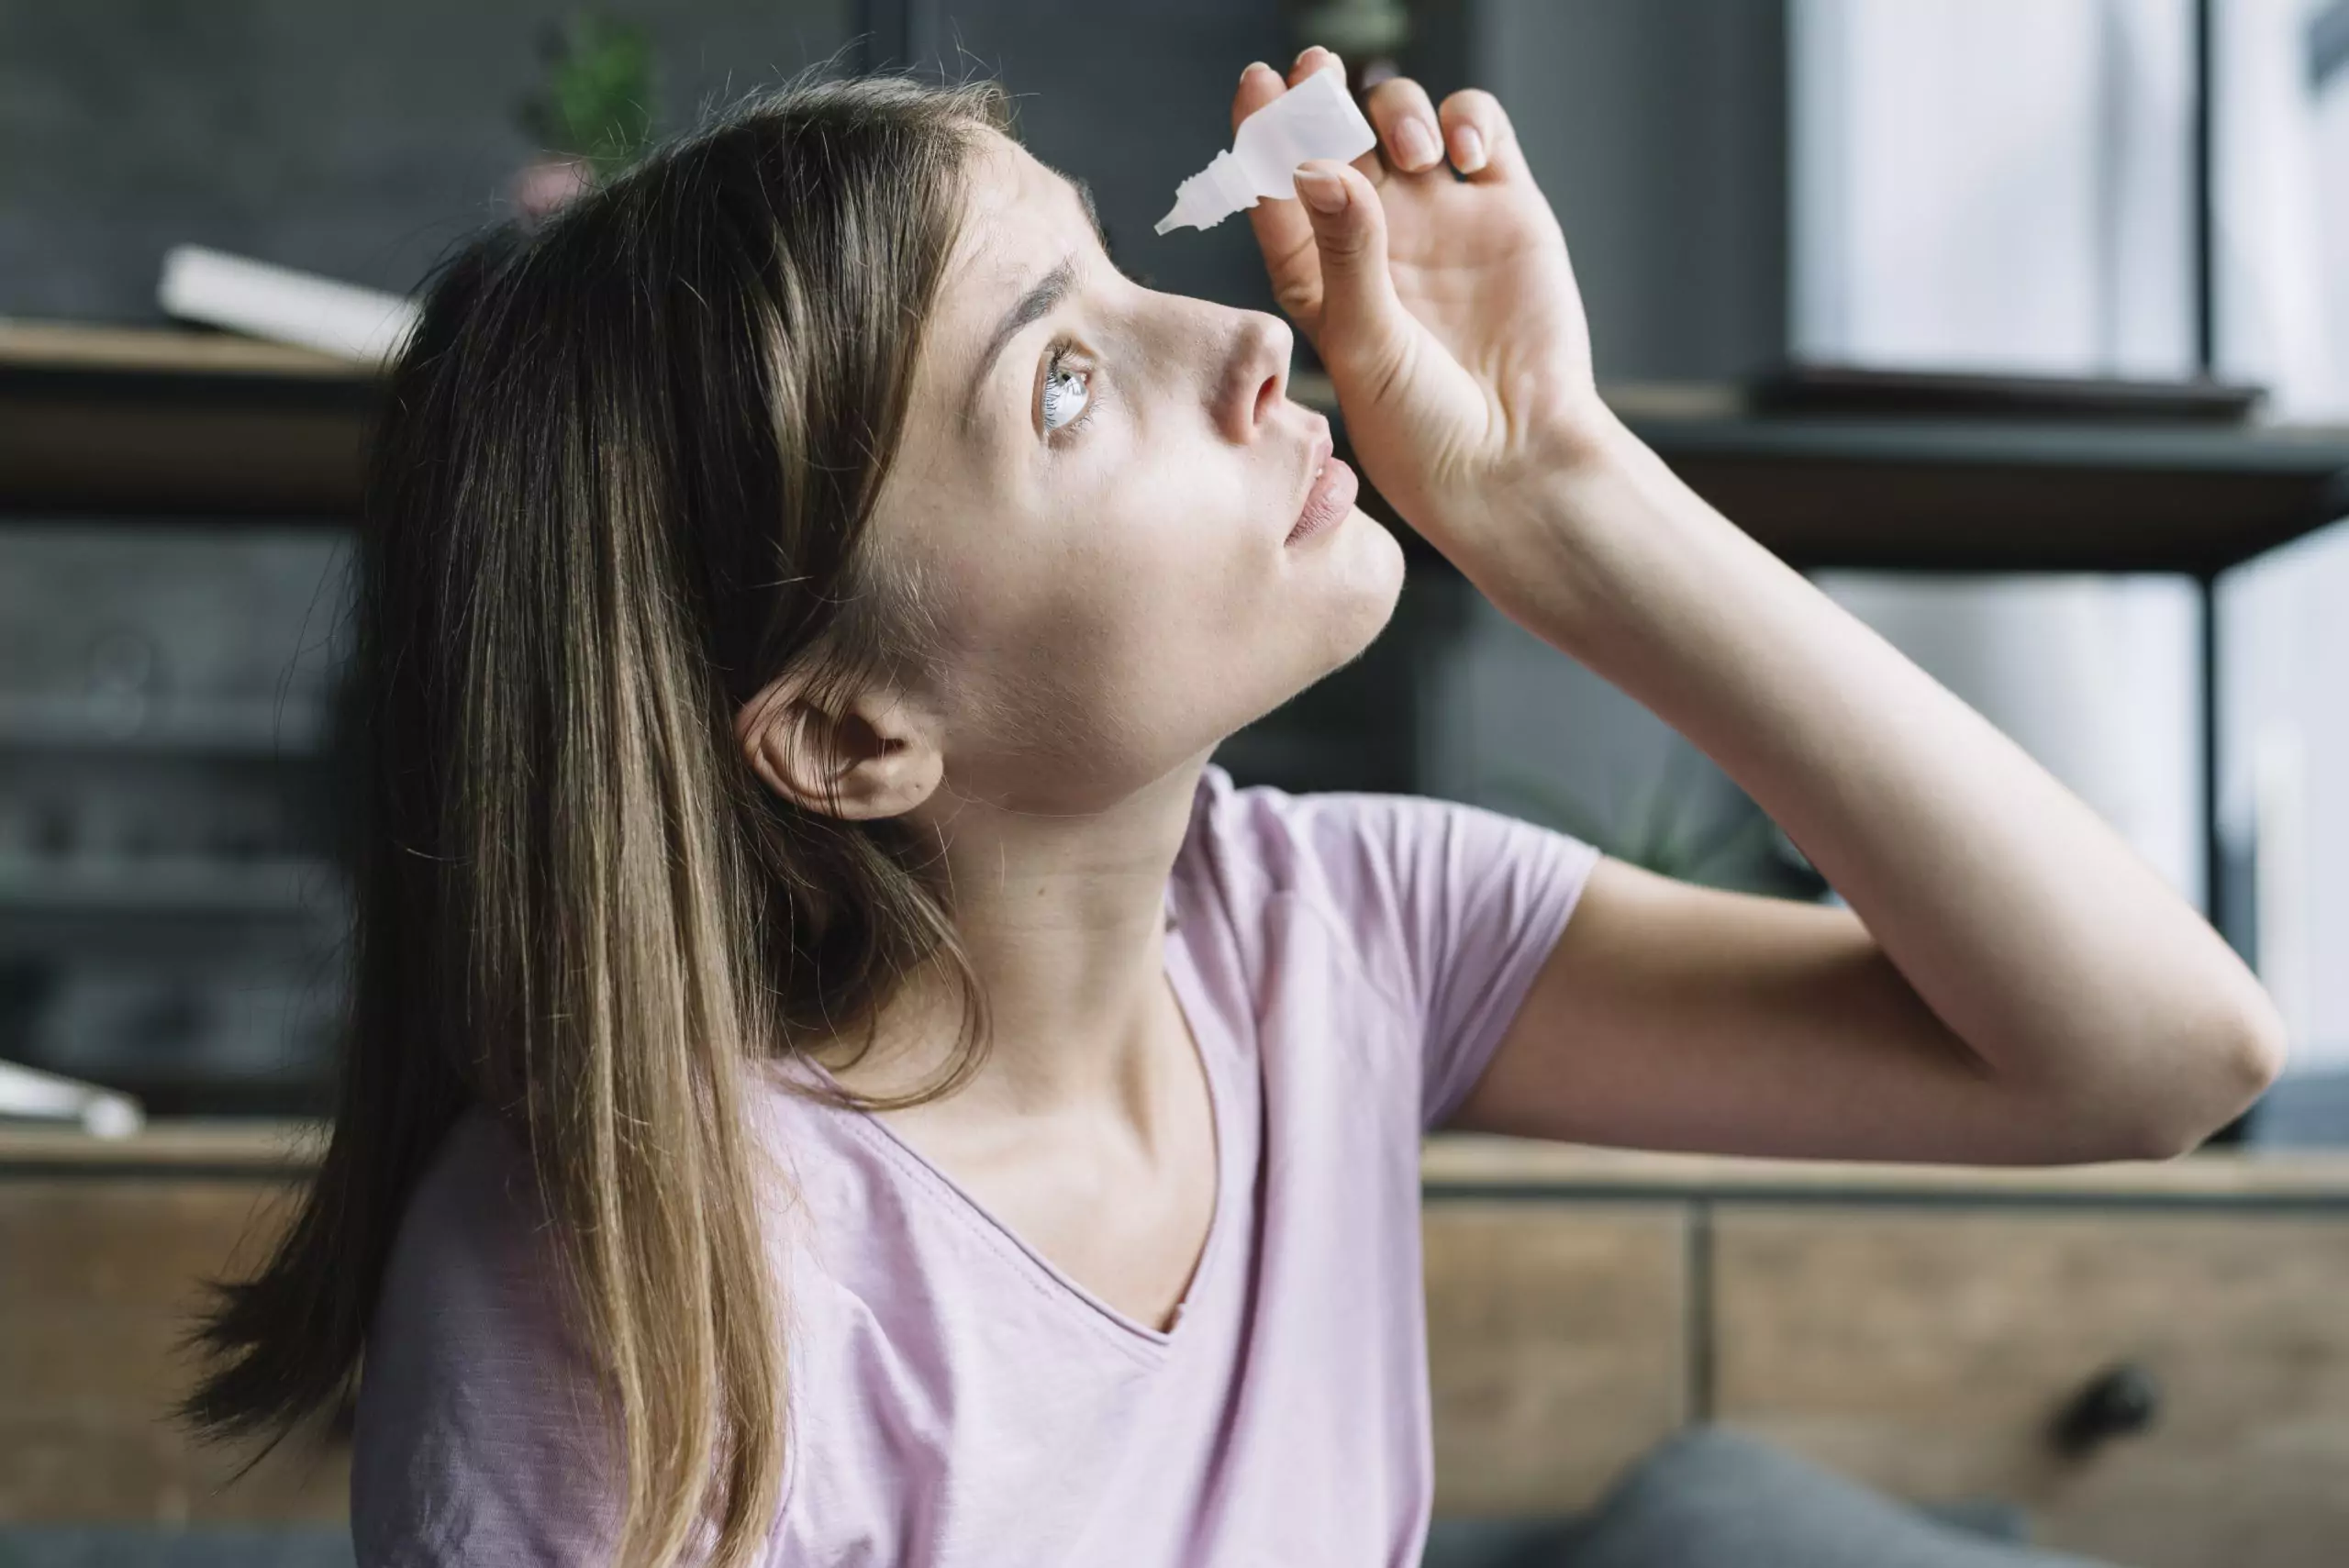 Young woman putting in eye drops for glaucoma treatment